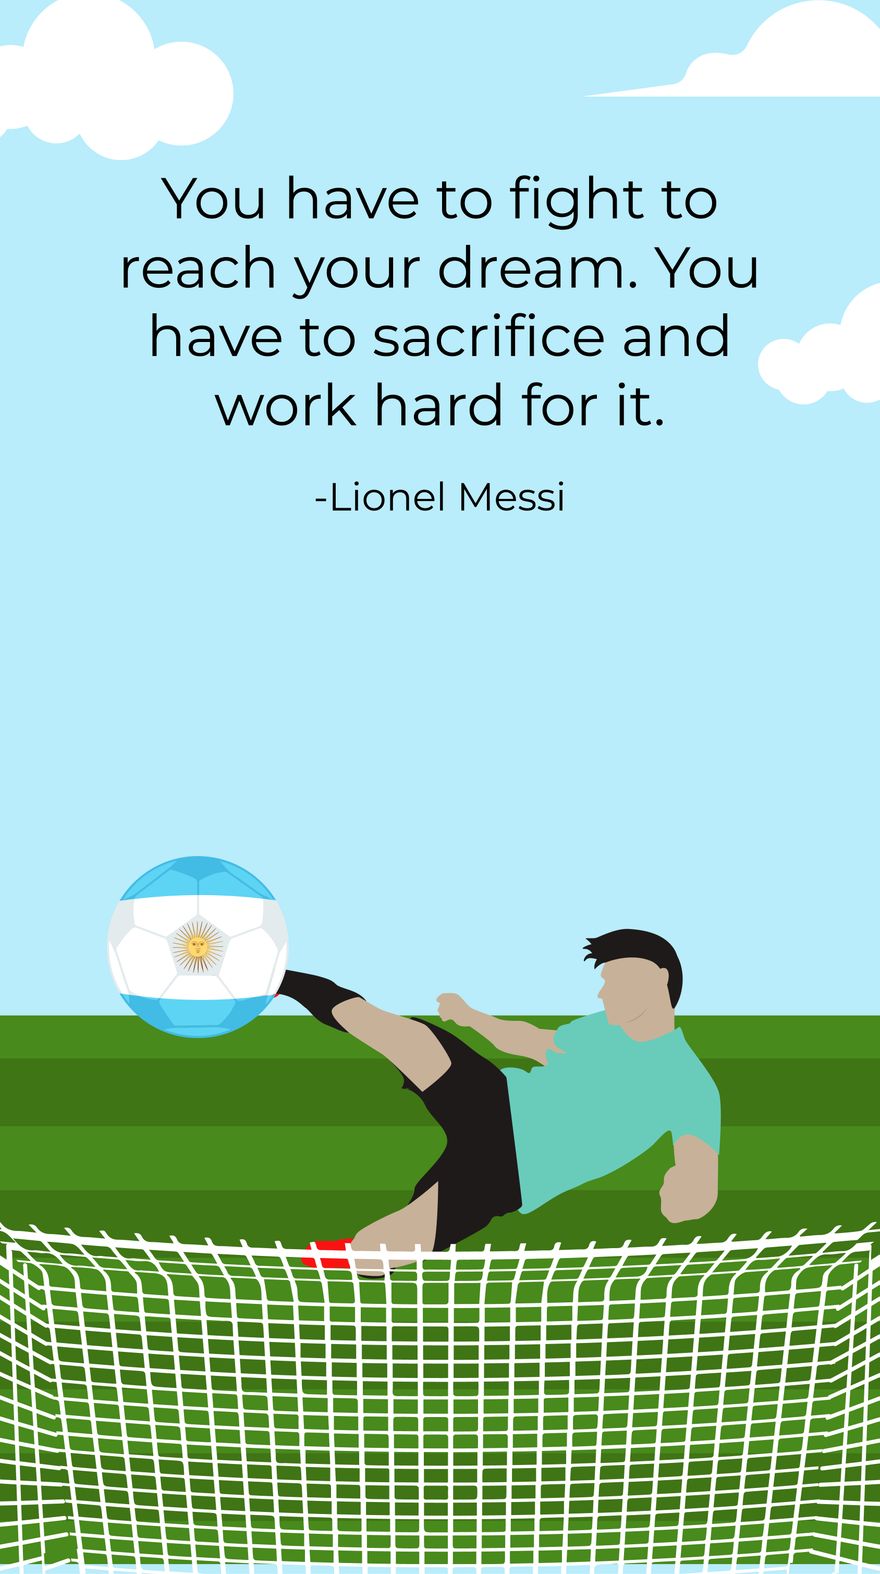 Free Lionel Messi - You have to fight to reach your dream. You have to sacrifice and work hard for it.